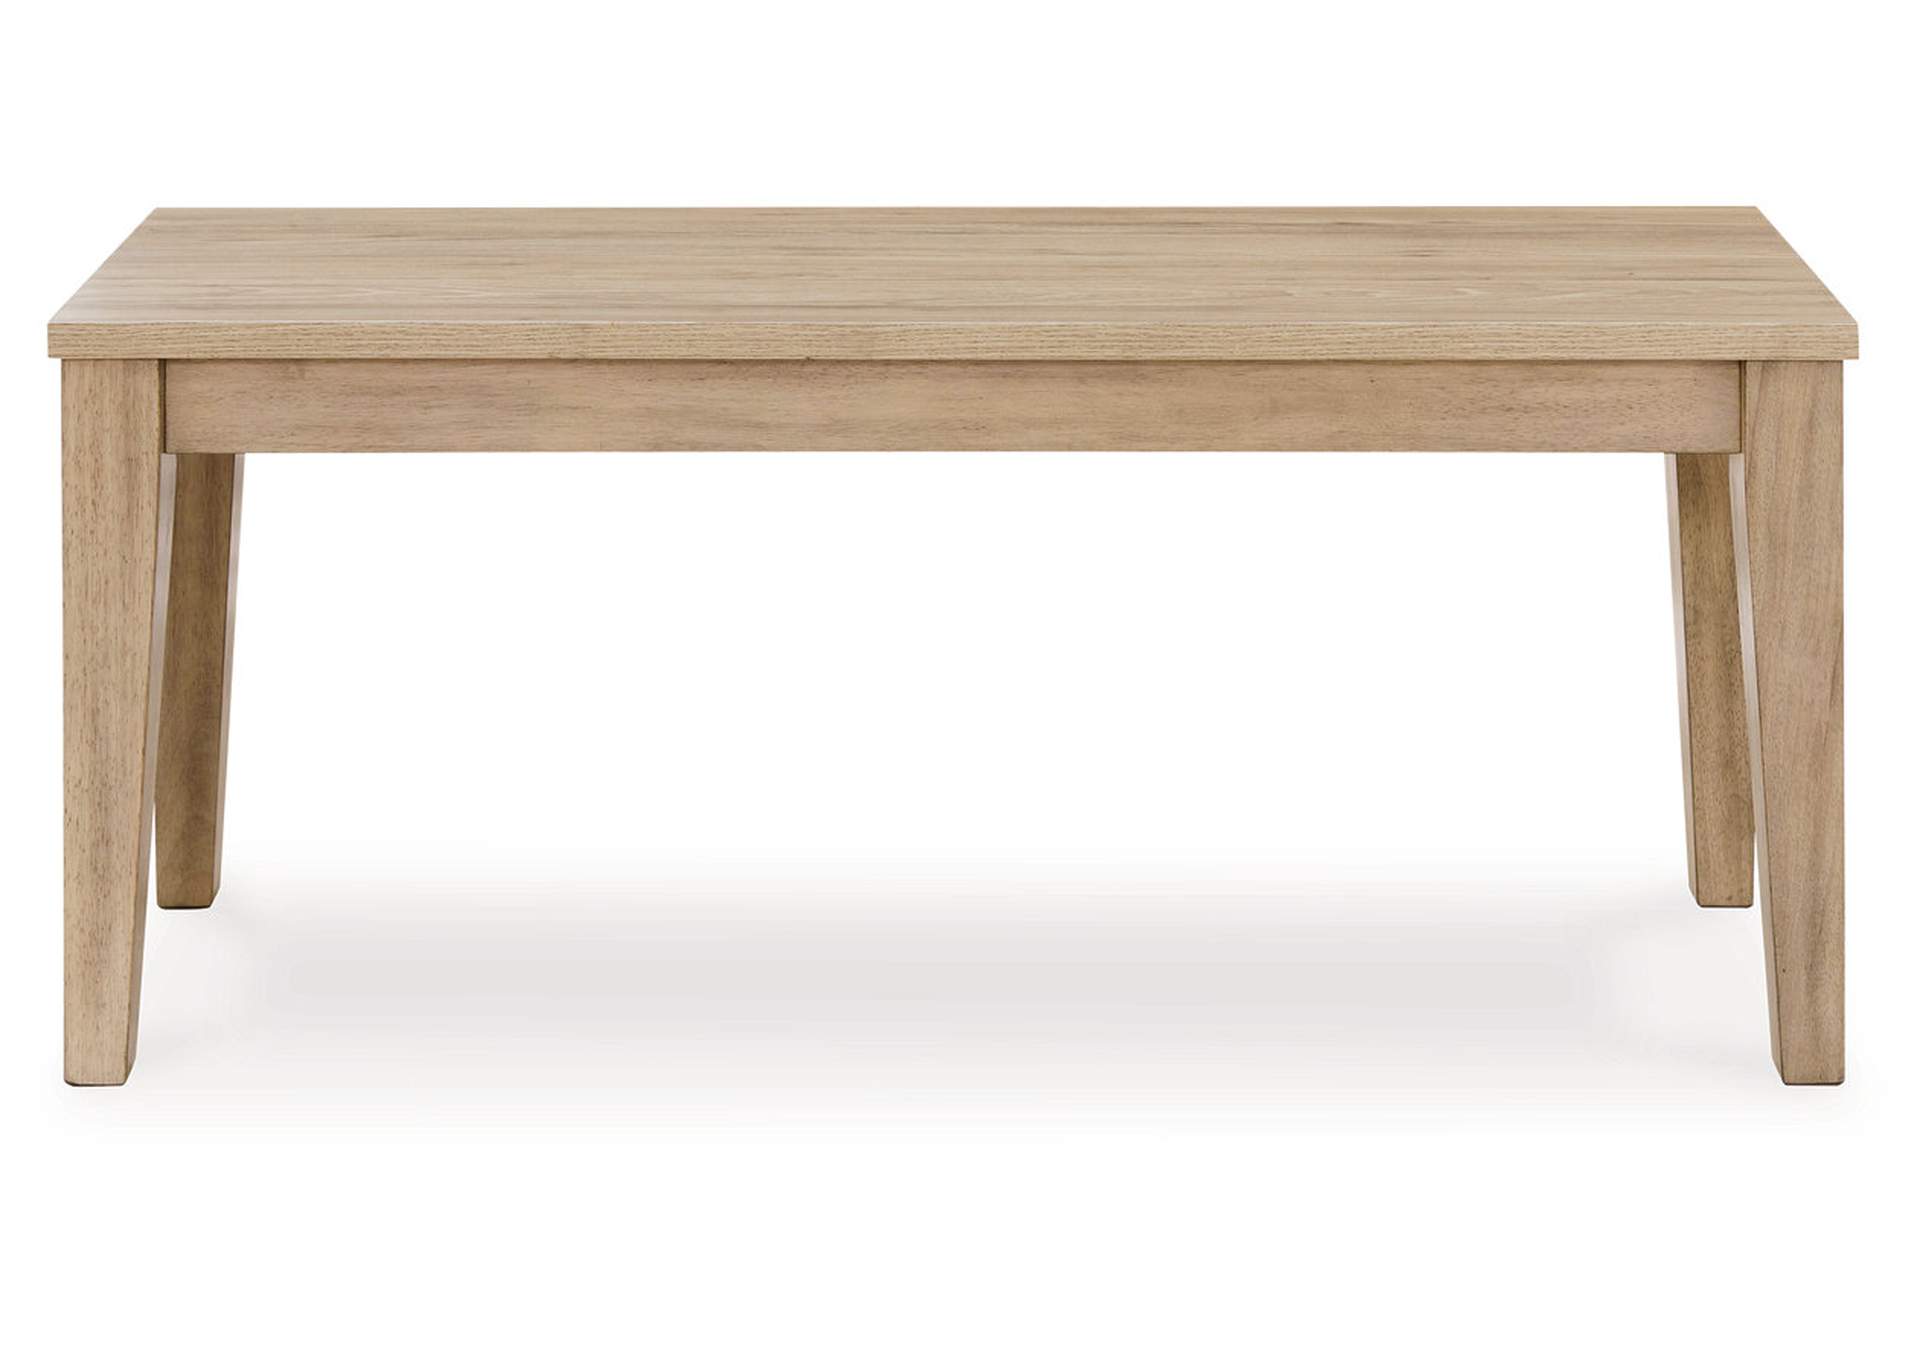 Gleanville 42" Dining Bench,Signature Design By Ashley